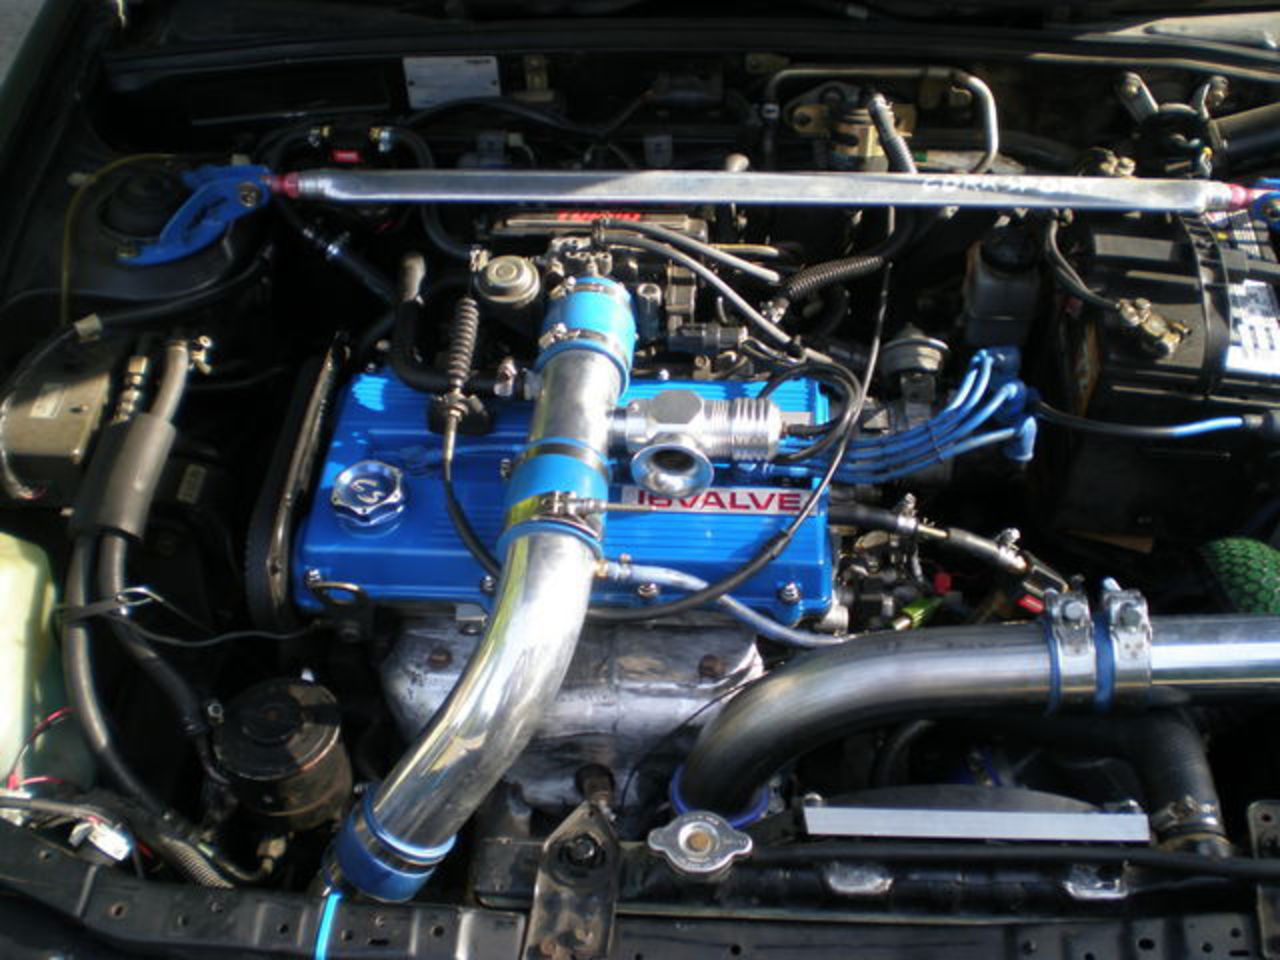 This setup is from Familia GT "Project 1988 Mazda Familia GT" of